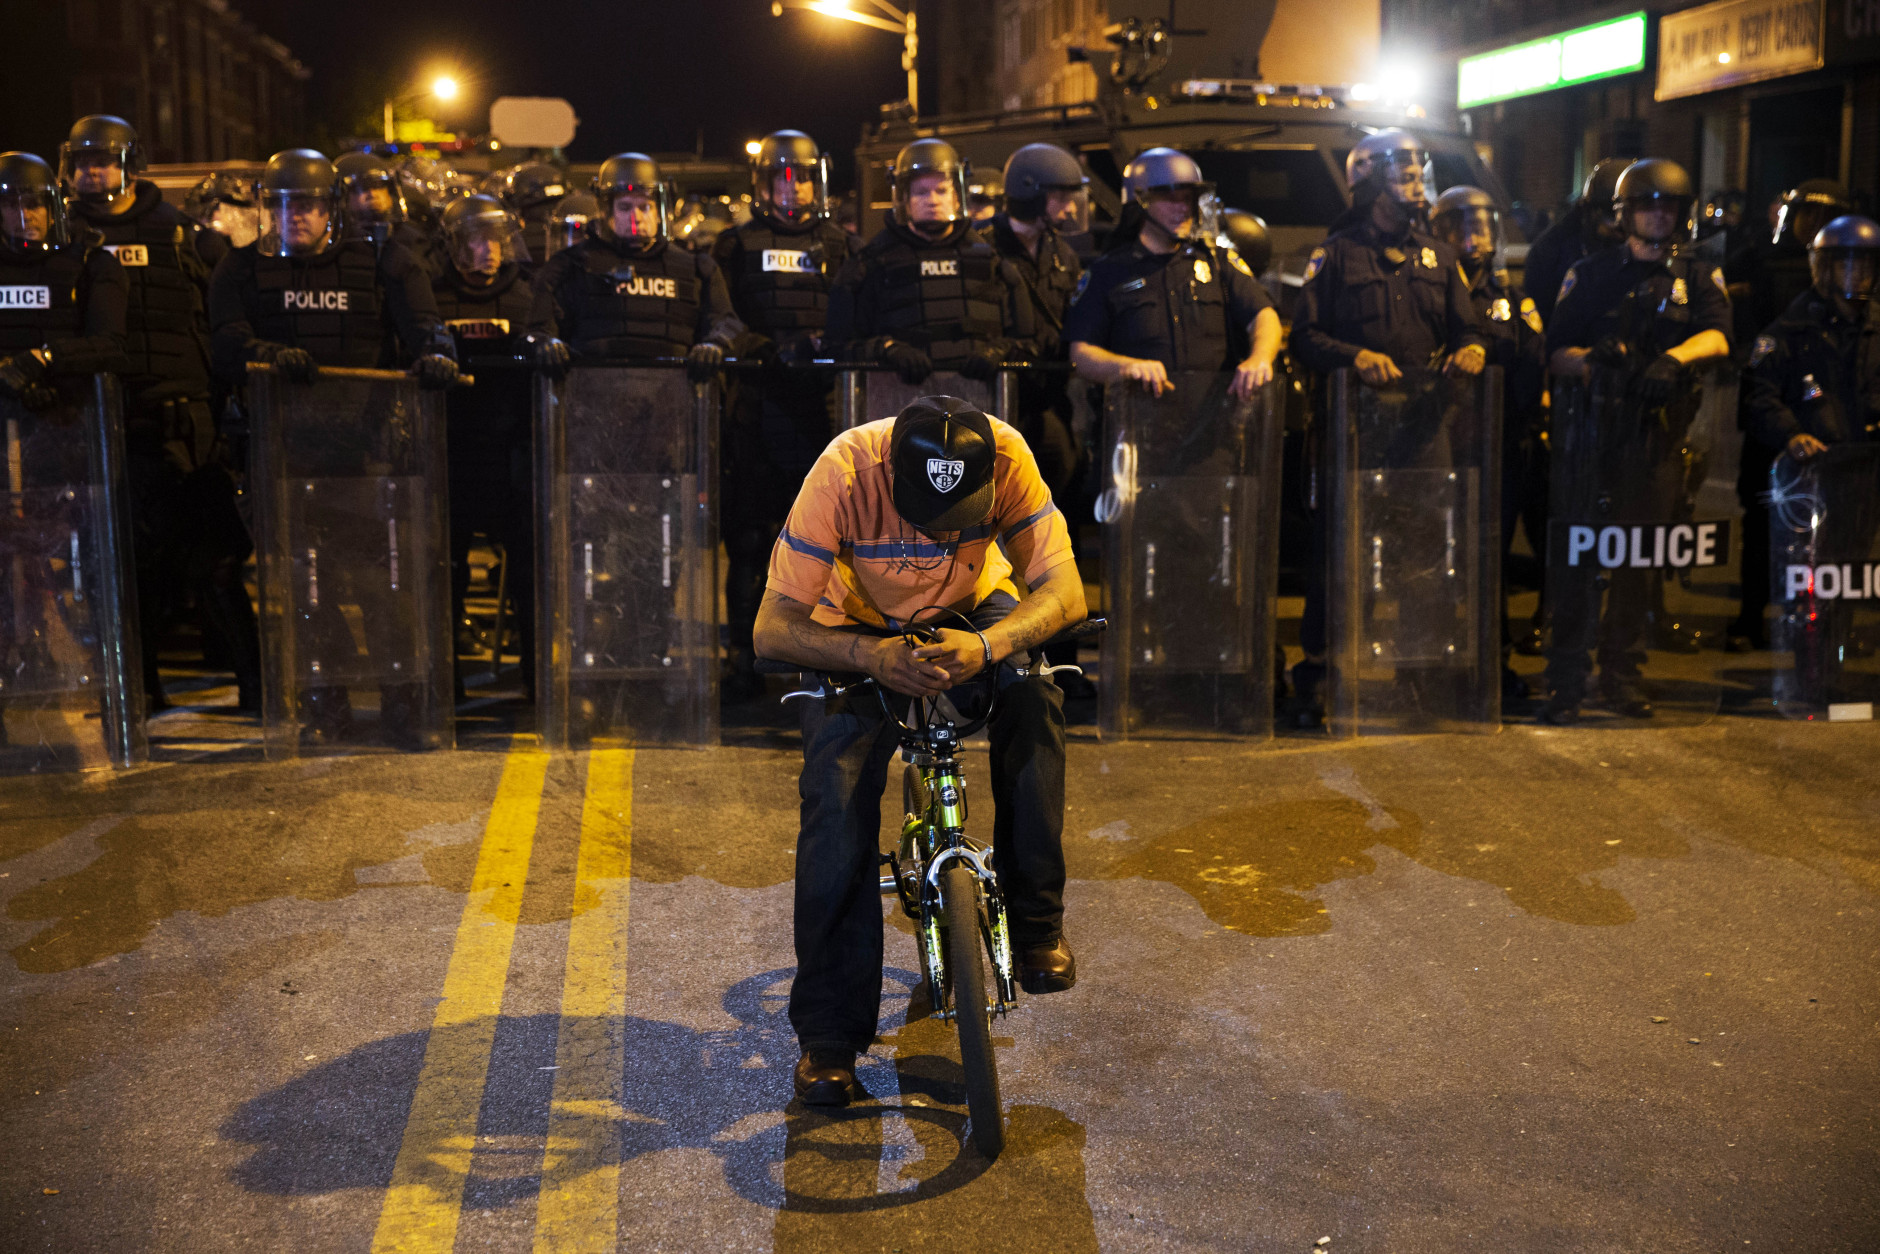 A man sits on a bicycle in front of a line of police officers in riot gear as part of a community effort to disperse the crowd ahead of a 10 p.m. curfew in the wake of Monday's riots following the funeral for Freddie Gray, Tuesday, April 28, 2015, in Baltimore. (AP Photo/David Goldman)